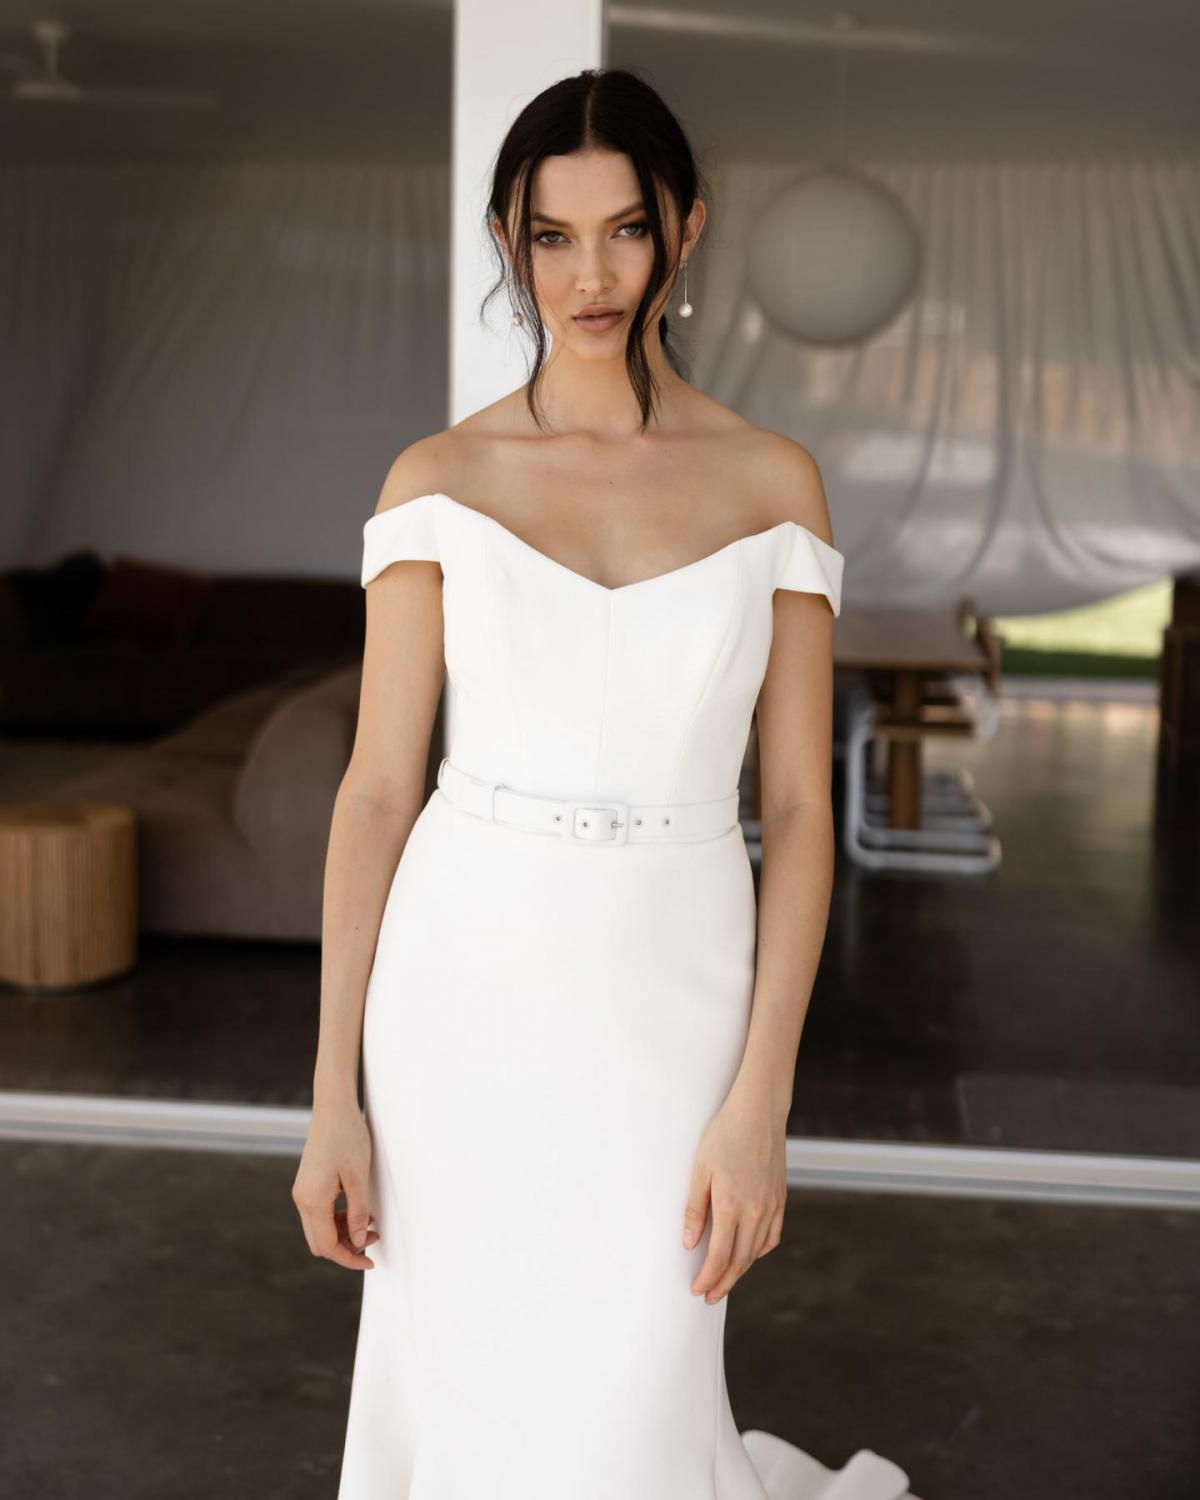 Upclose of the Raven gown by Karen Willis Holmes, an off the shoulder fit and flare simple wedding dress. with belt